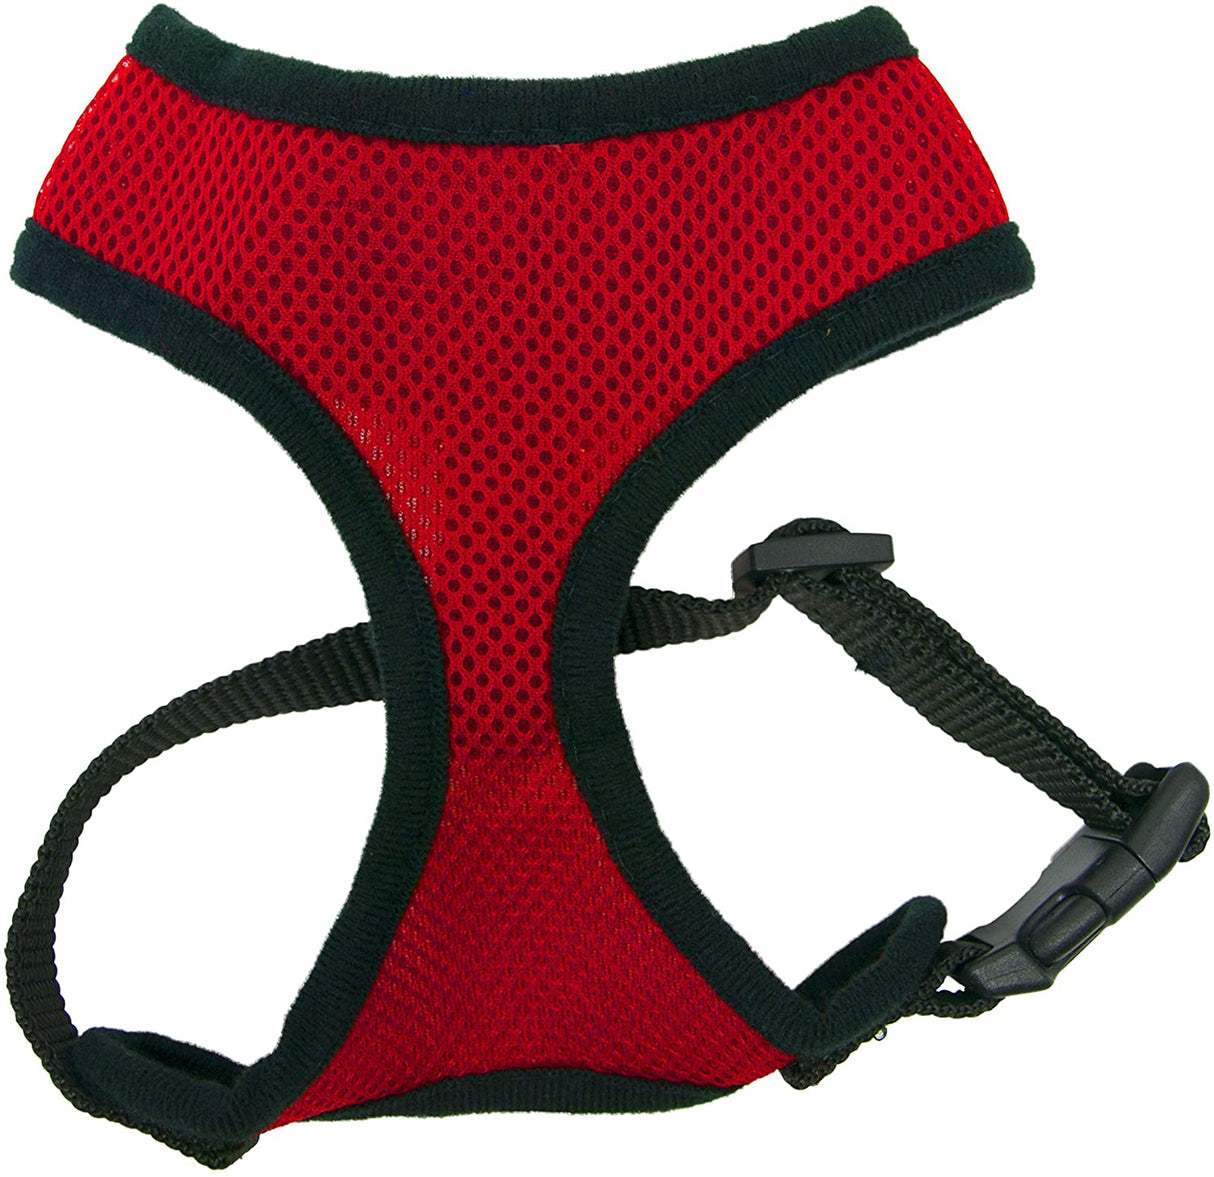 Medium - 1 count Four Paws Comfort Control Harness Red